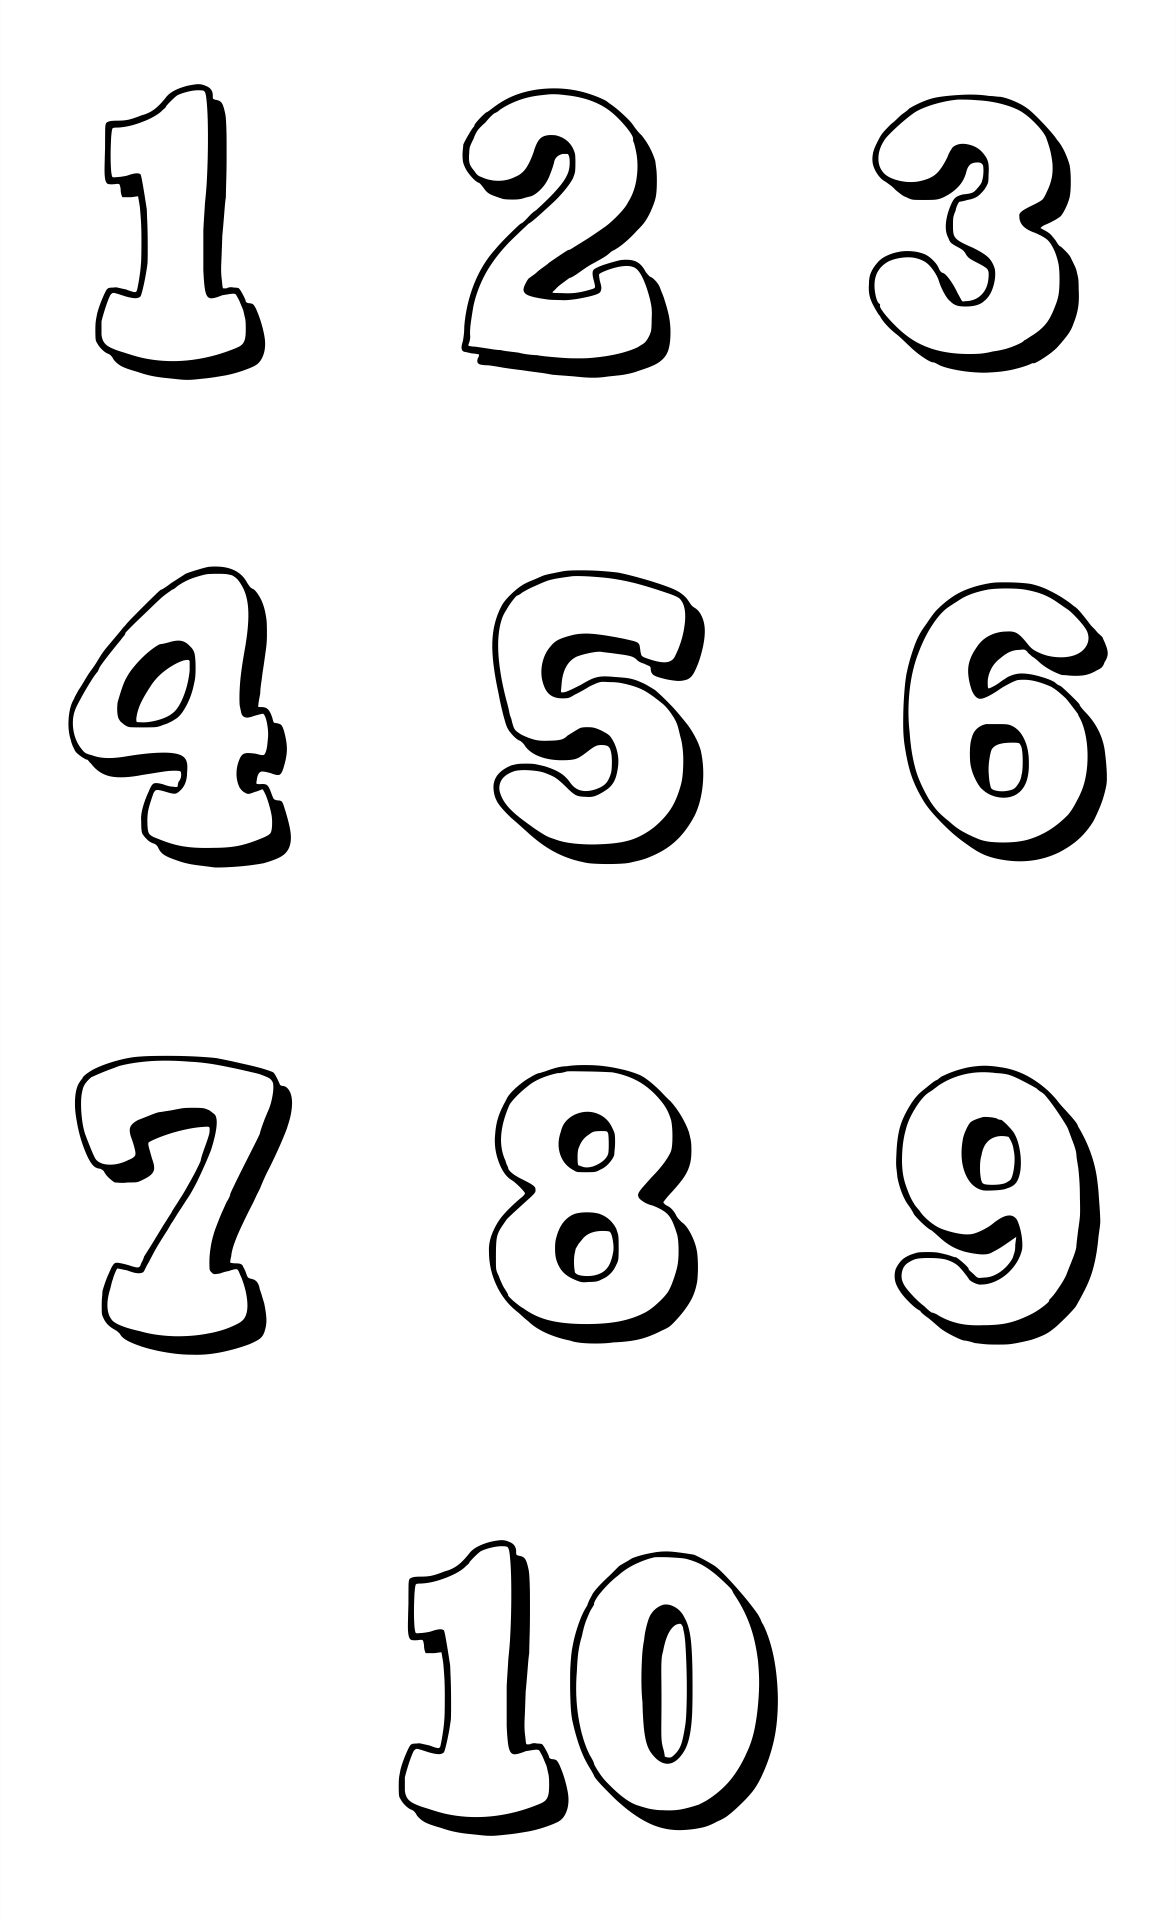 Printable Bubble Writing Numbers 1 10 | Bubble Numbers, Bubble - Free Printable Bubble Numbers 1-20